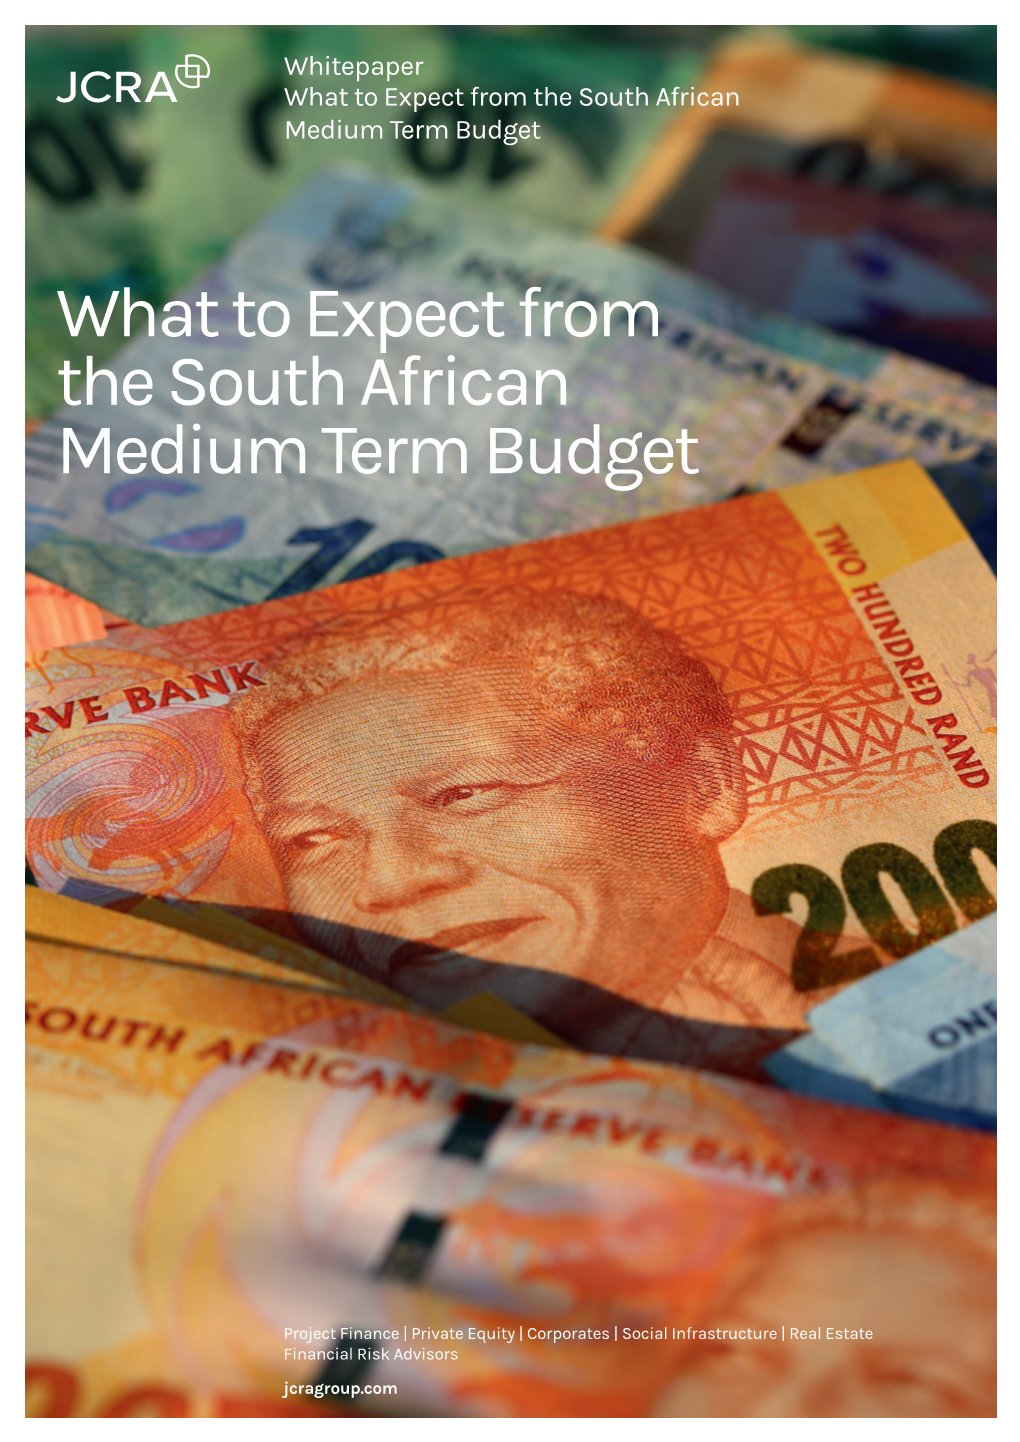 What to Expect from the South African Medium Term Budget